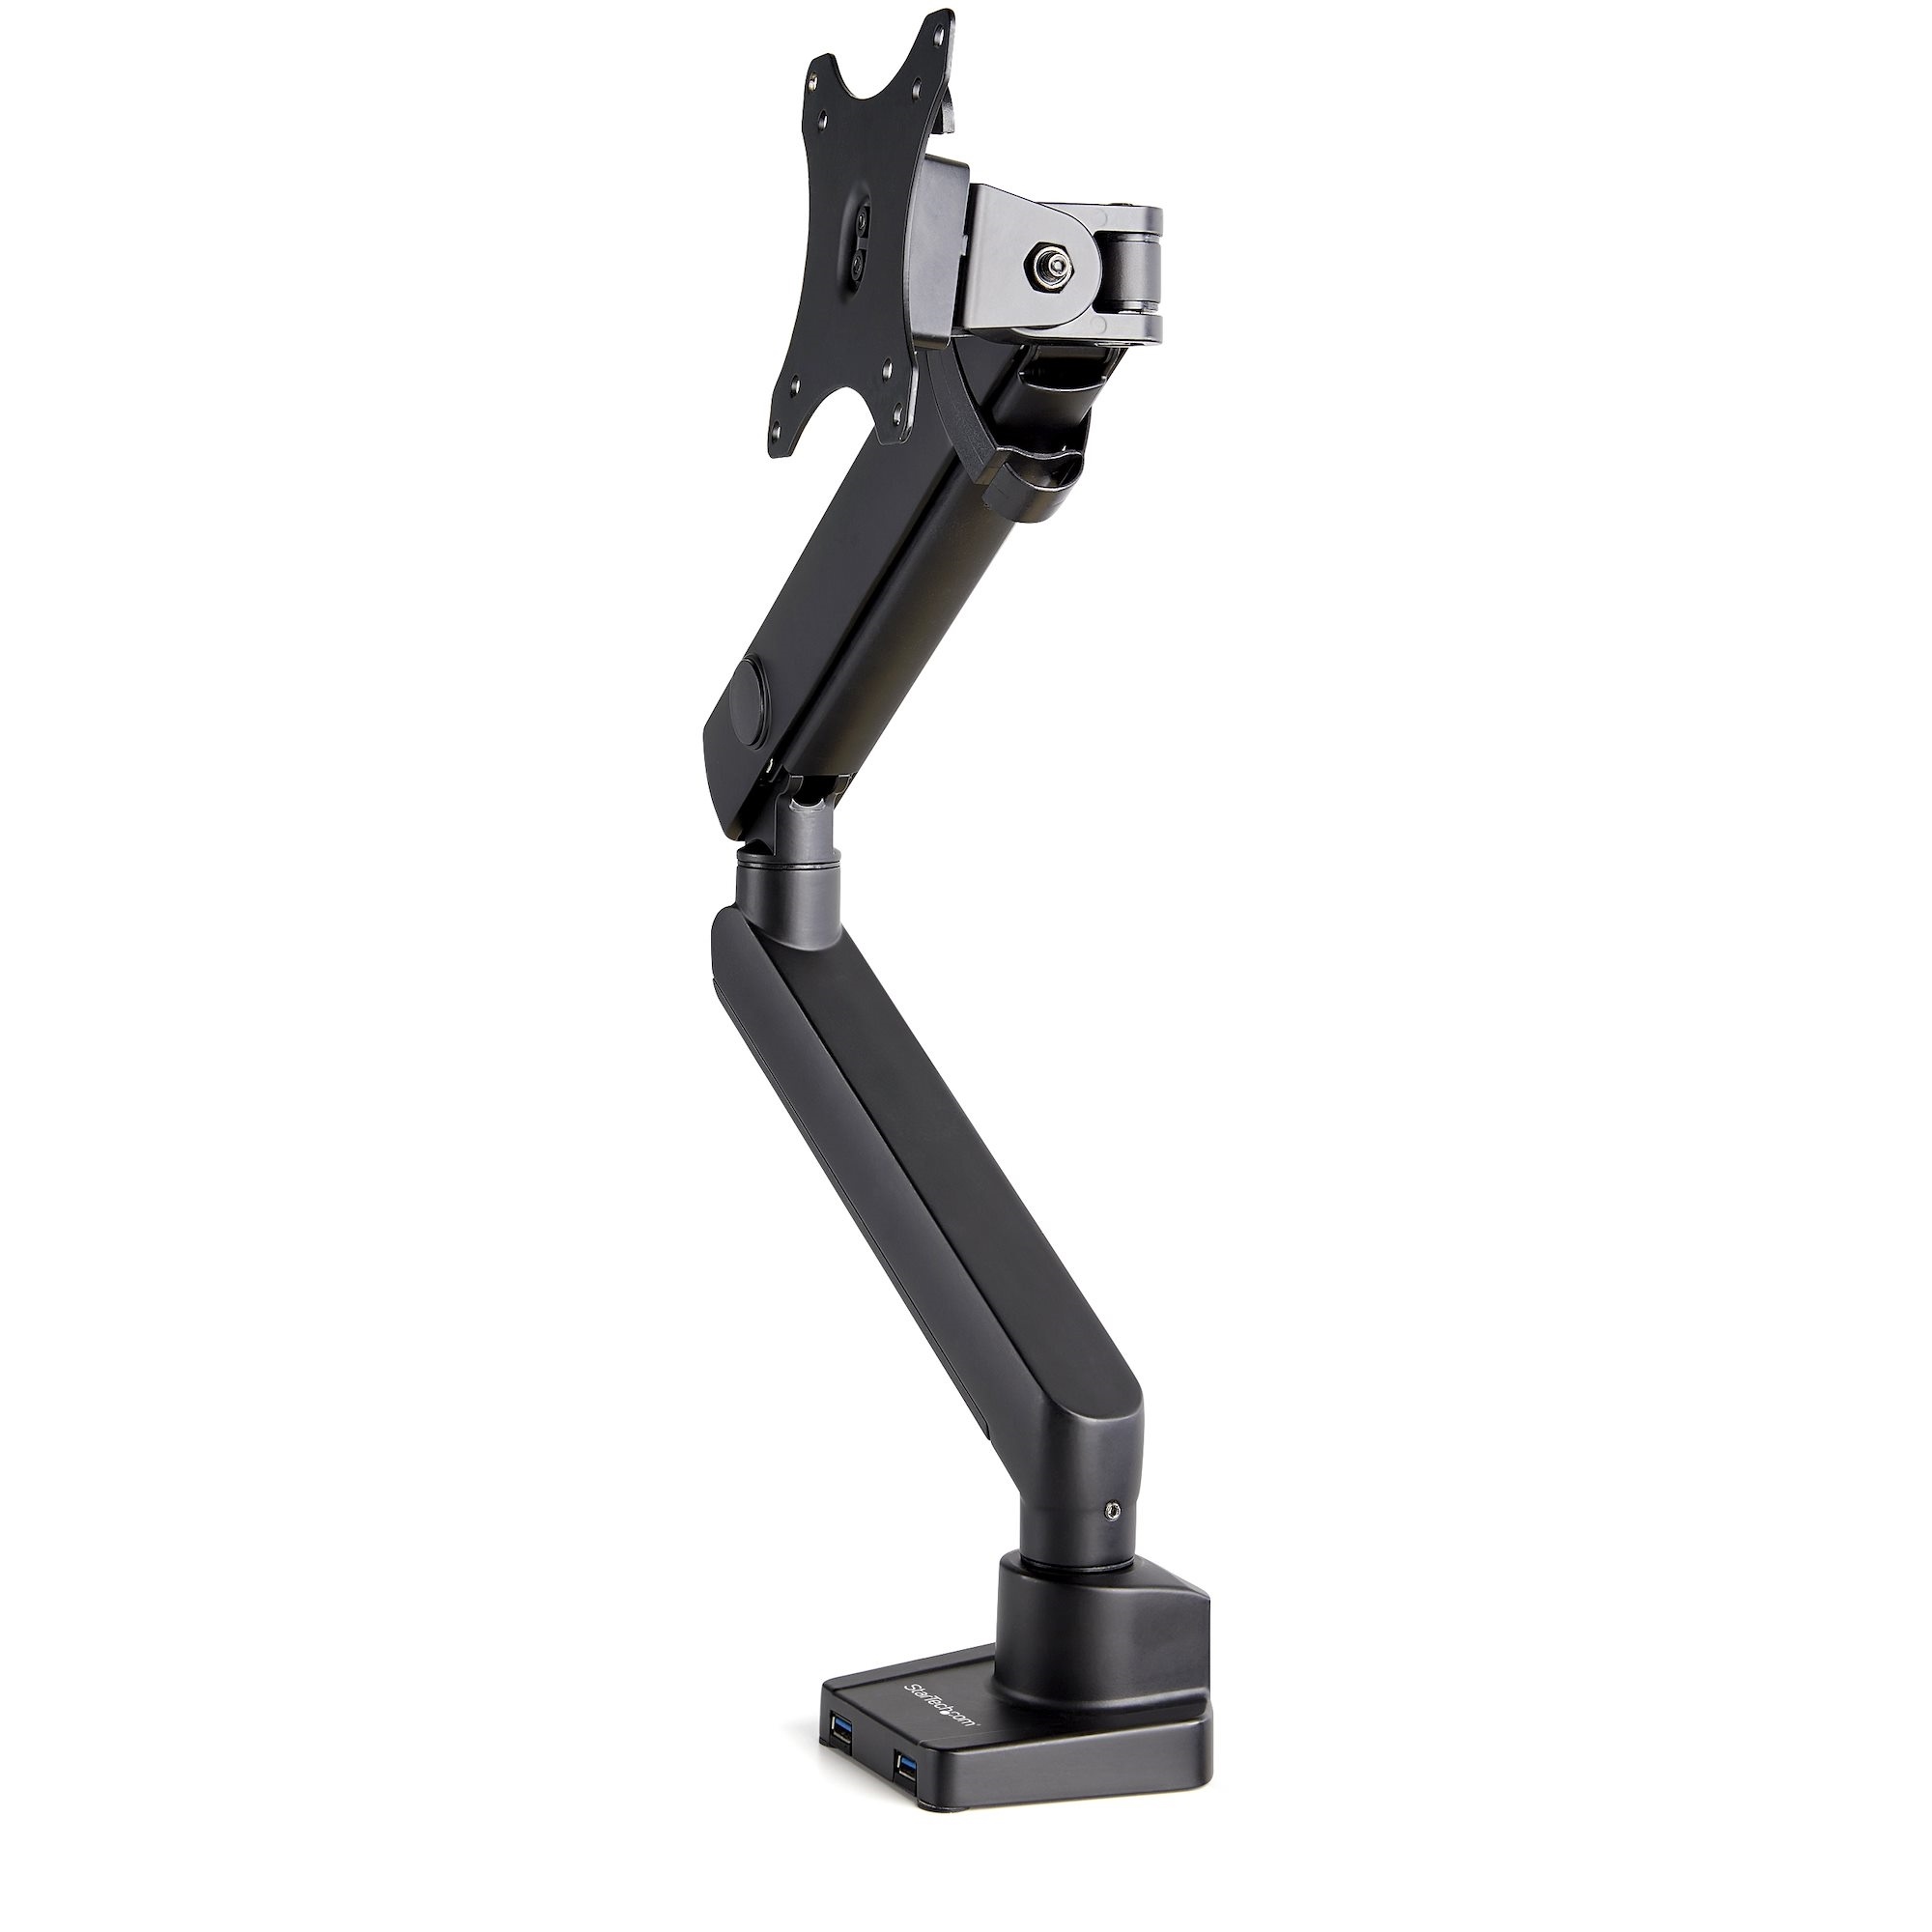 Startech Desk Mount Monitor Arm with 2x USB 3.0 Ports